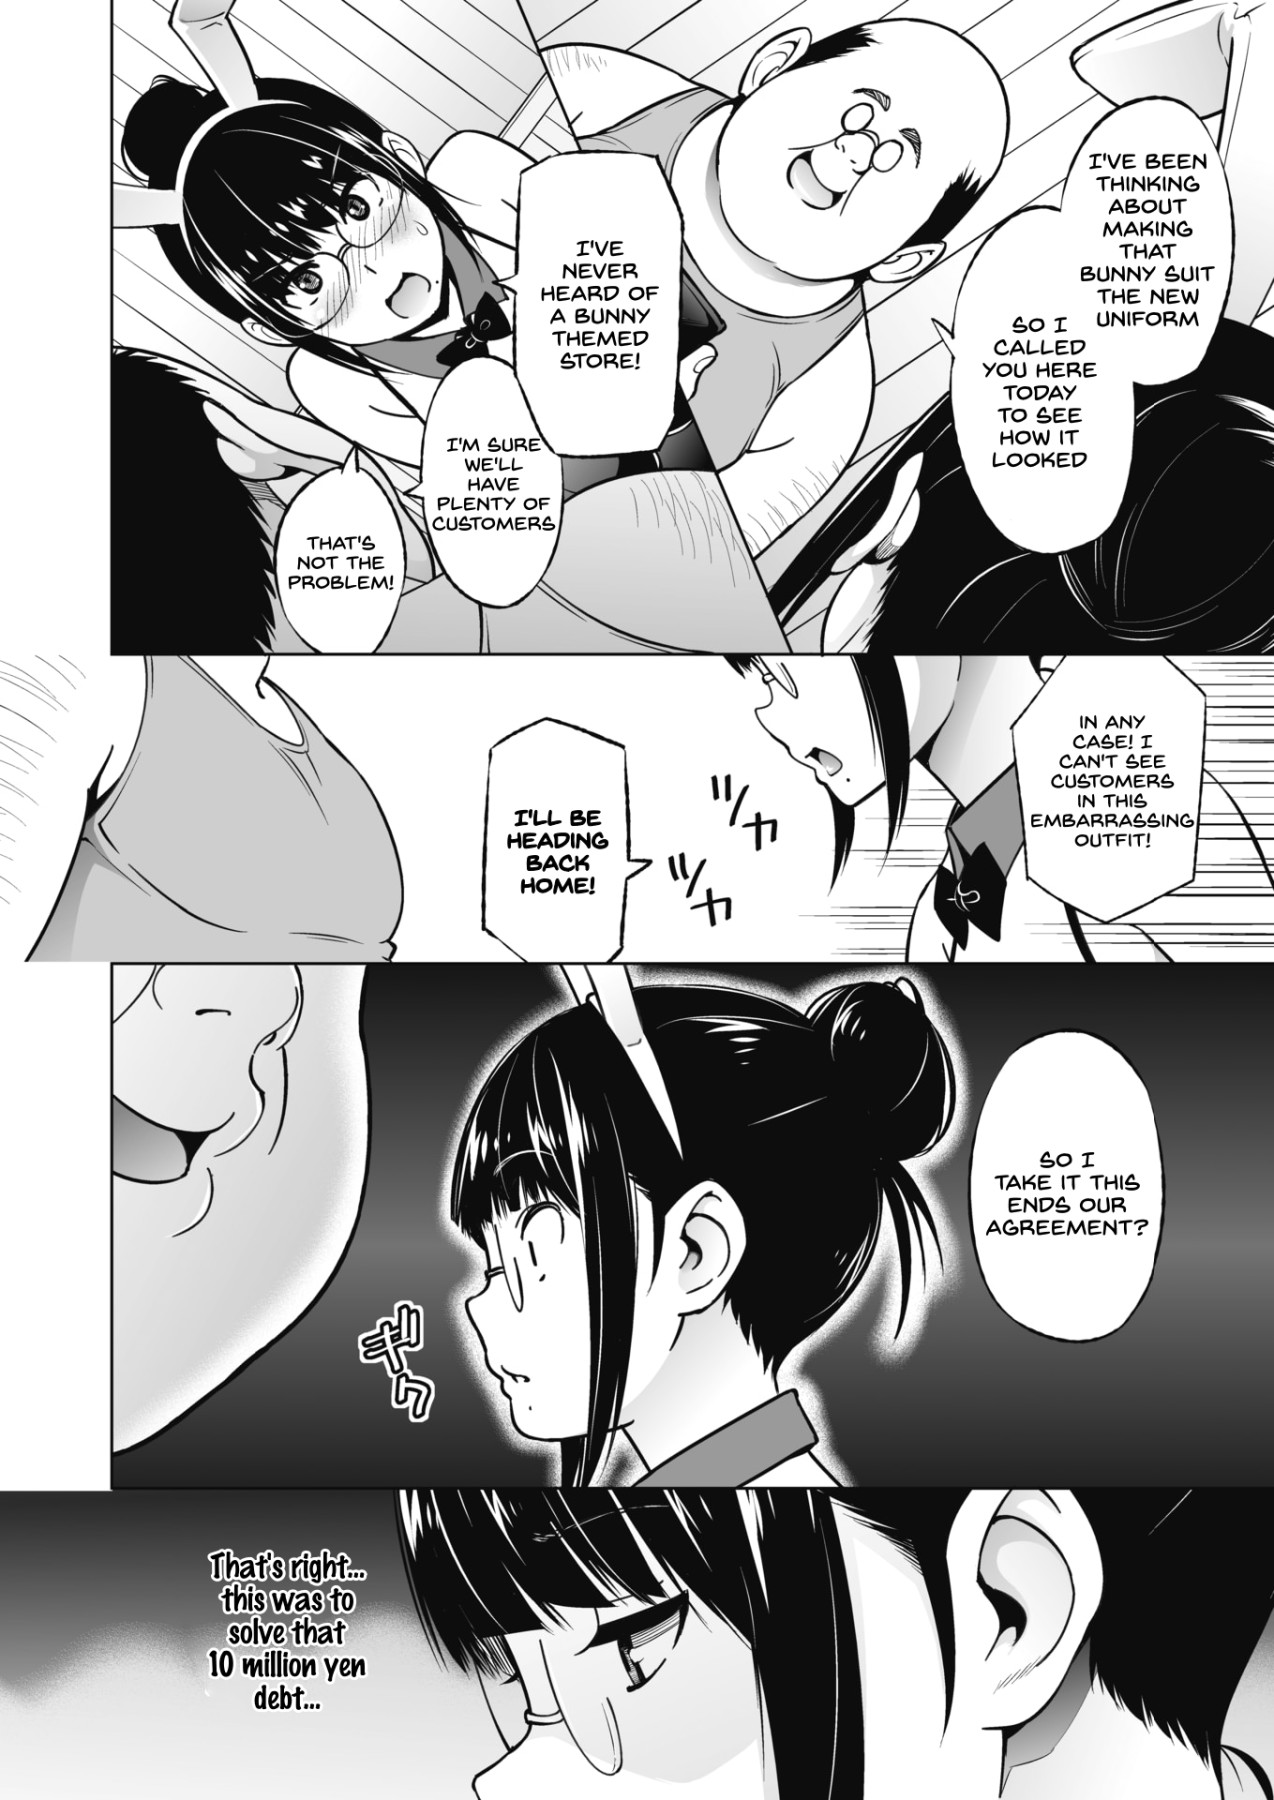 Hentai Manga Comic-Older Sister And Younger Brother Part-Time Job-Chapter 2-2